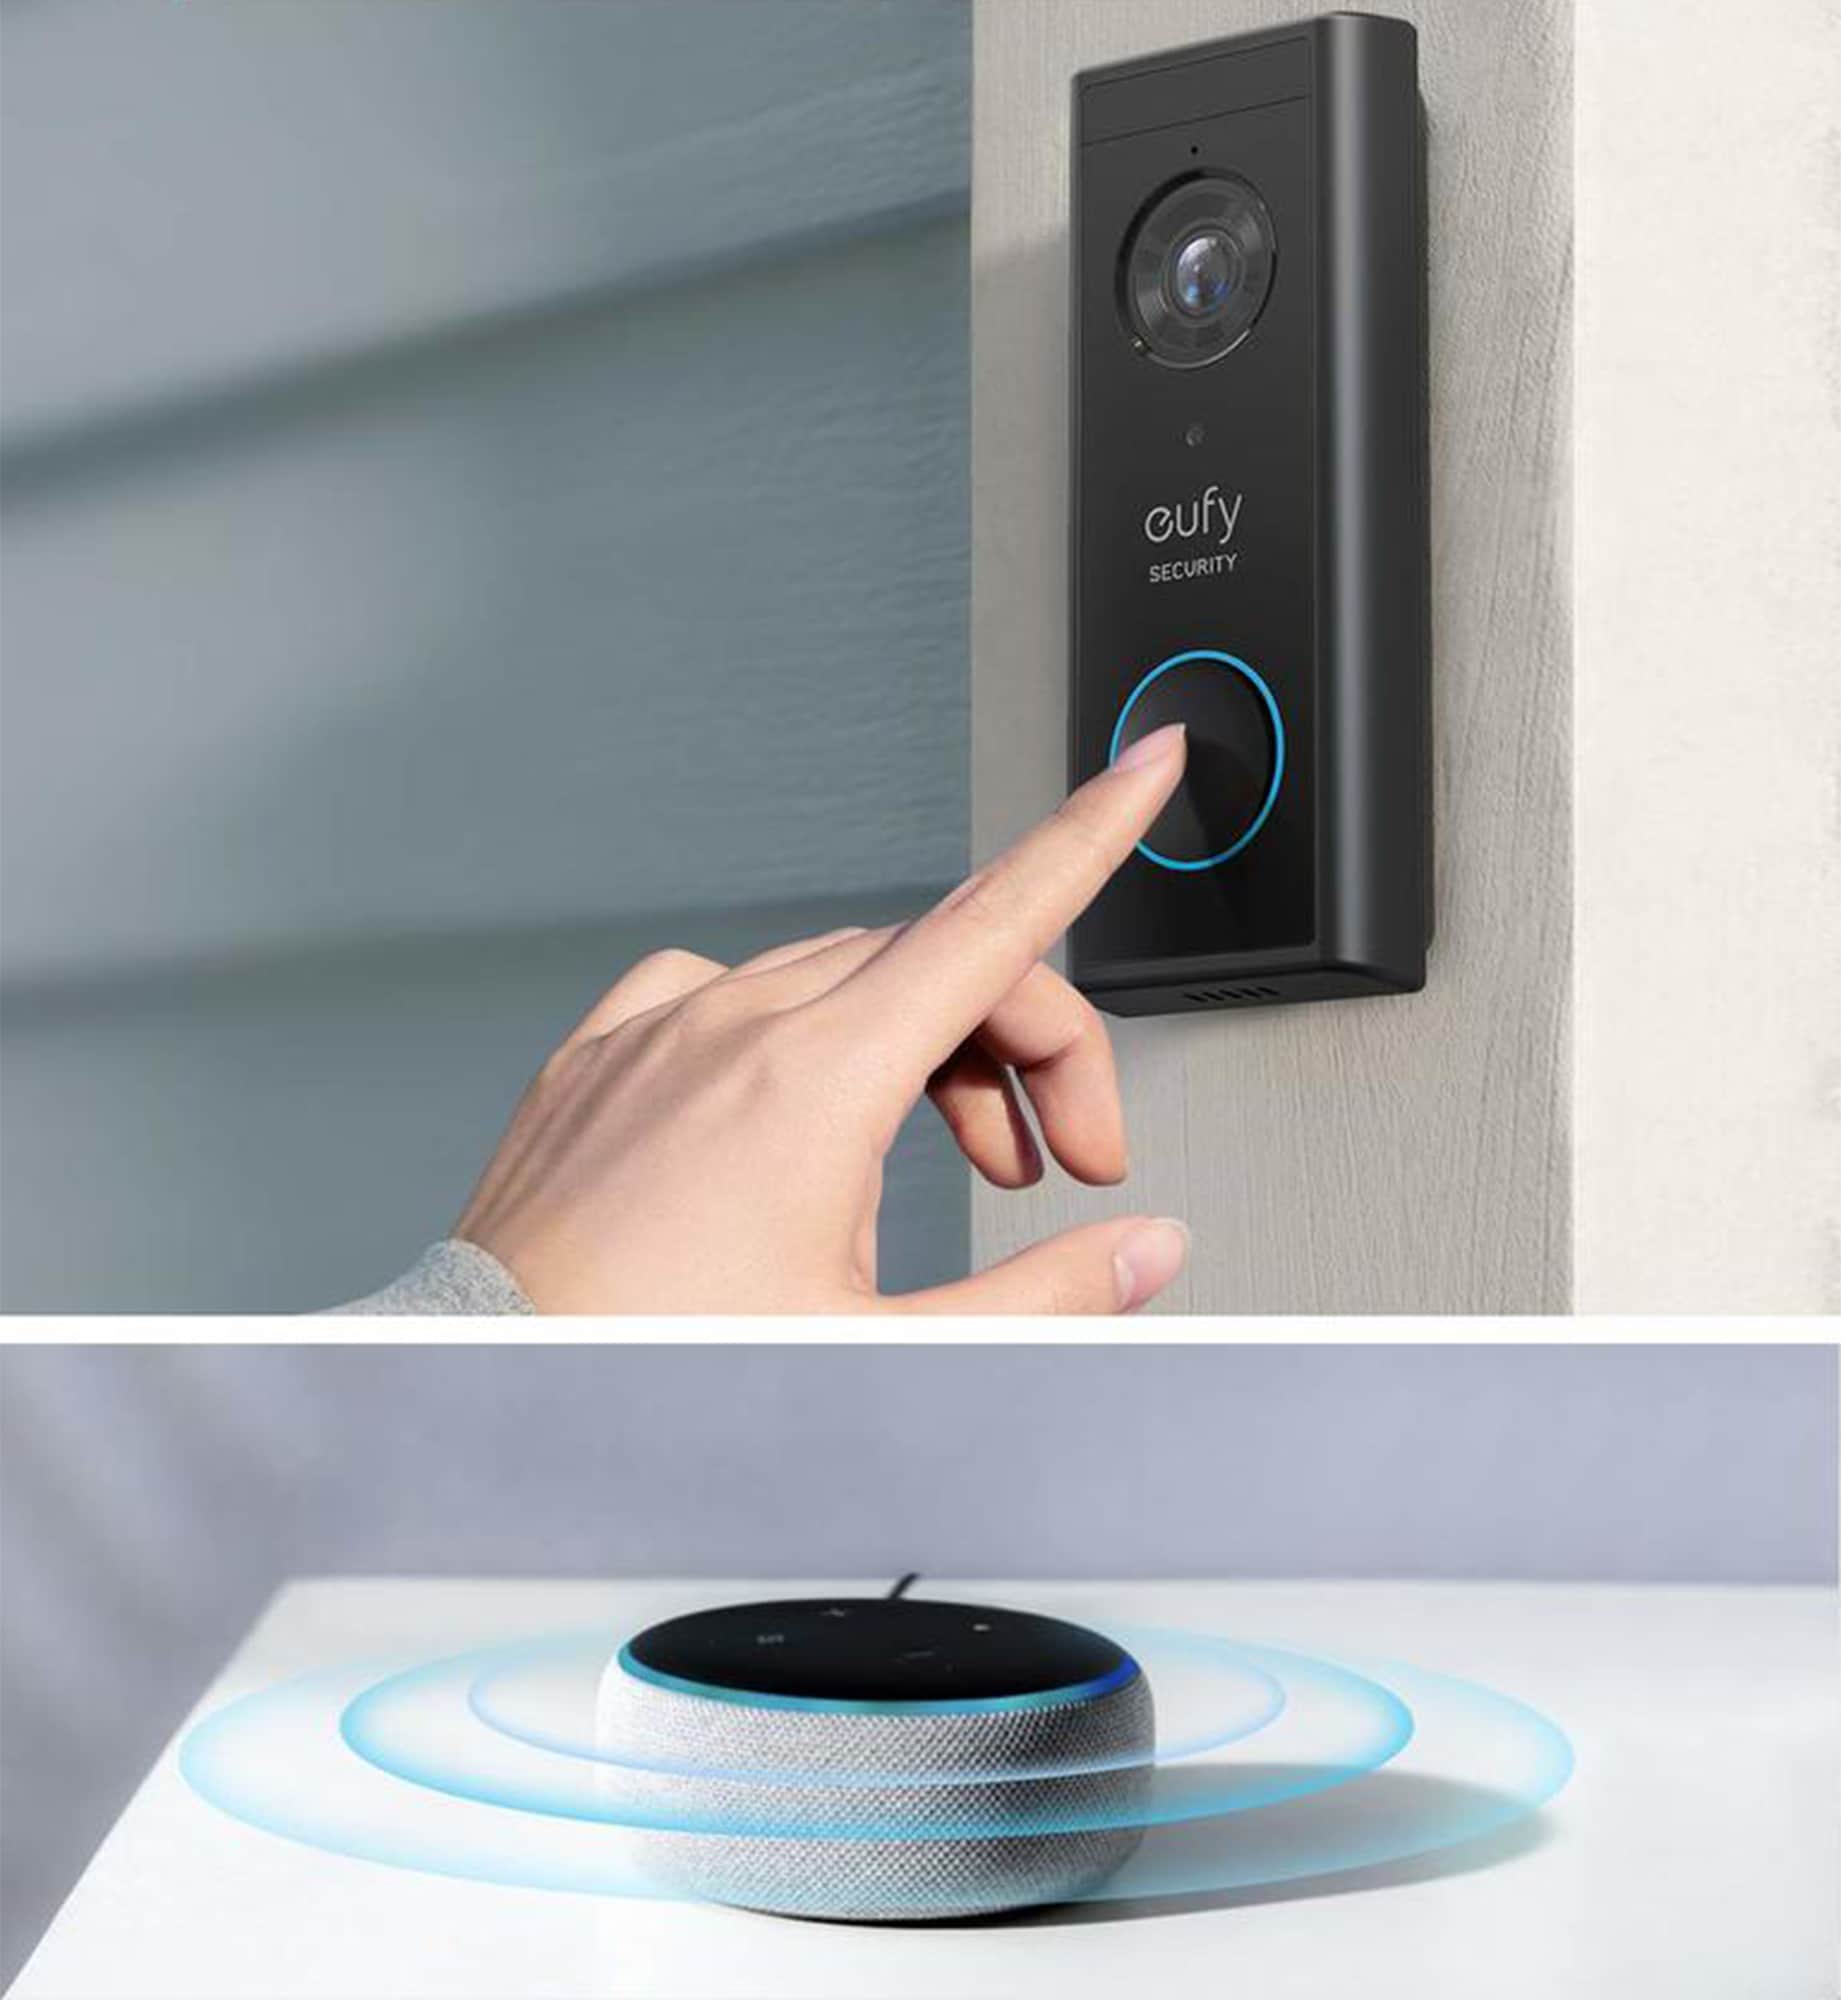 eufy Security, Wi-Fi Video Doorbell, 2K Resolution, No Monthly Fees, Local  Storage, Human Detection, with eufy Indoor Chime, Hardwiring Power and